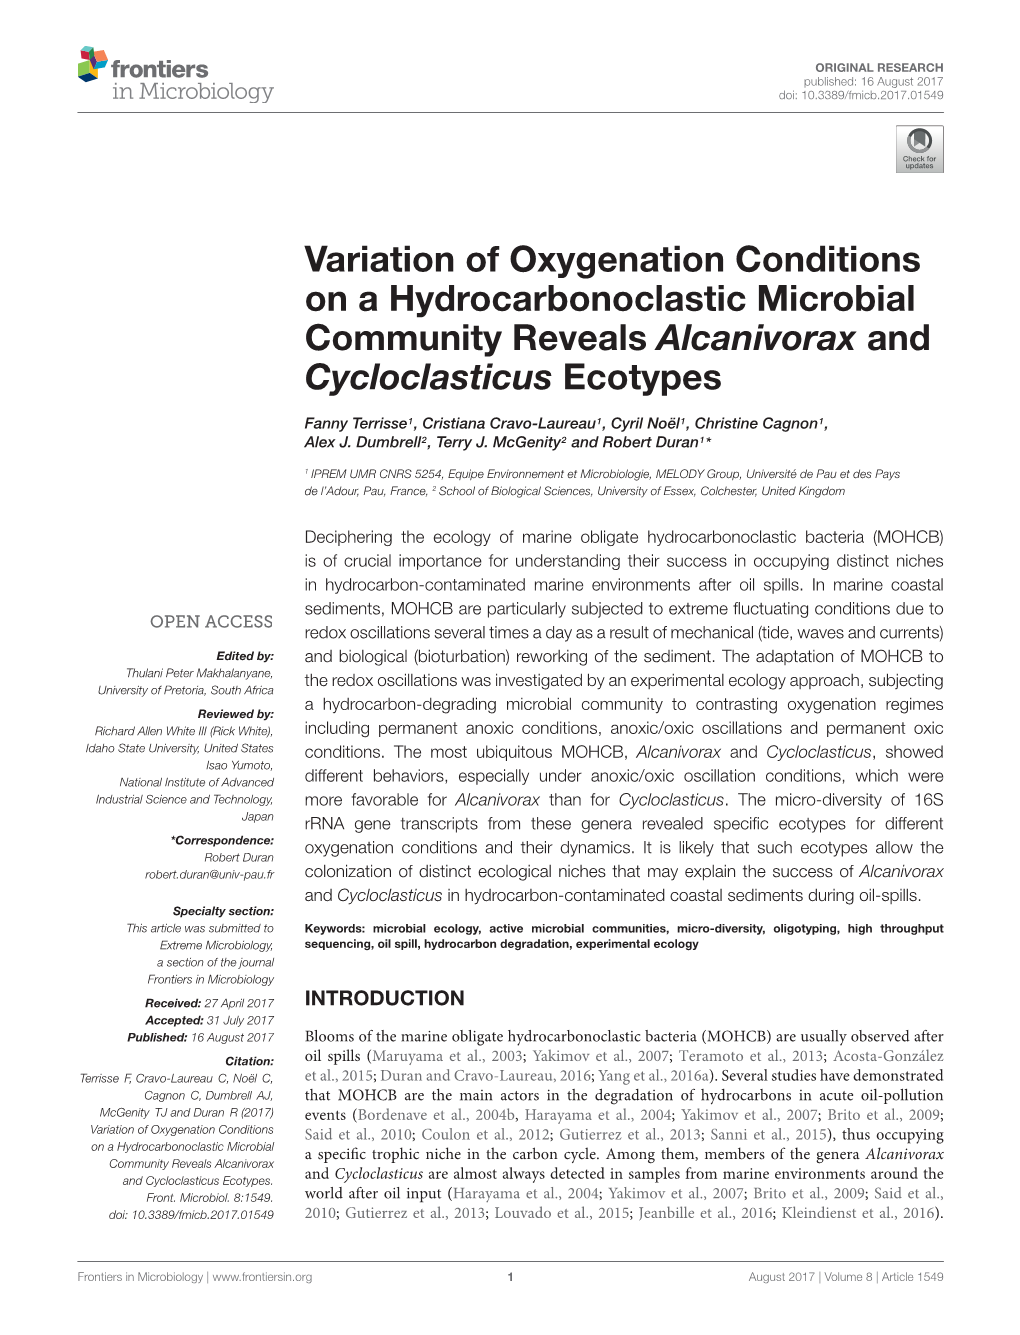 Variation of Oxygenation Conditions on a Hydrocarbonoclastic Microbial Community Reveals Alcanivorax and Cycloclasticus Ecotypes